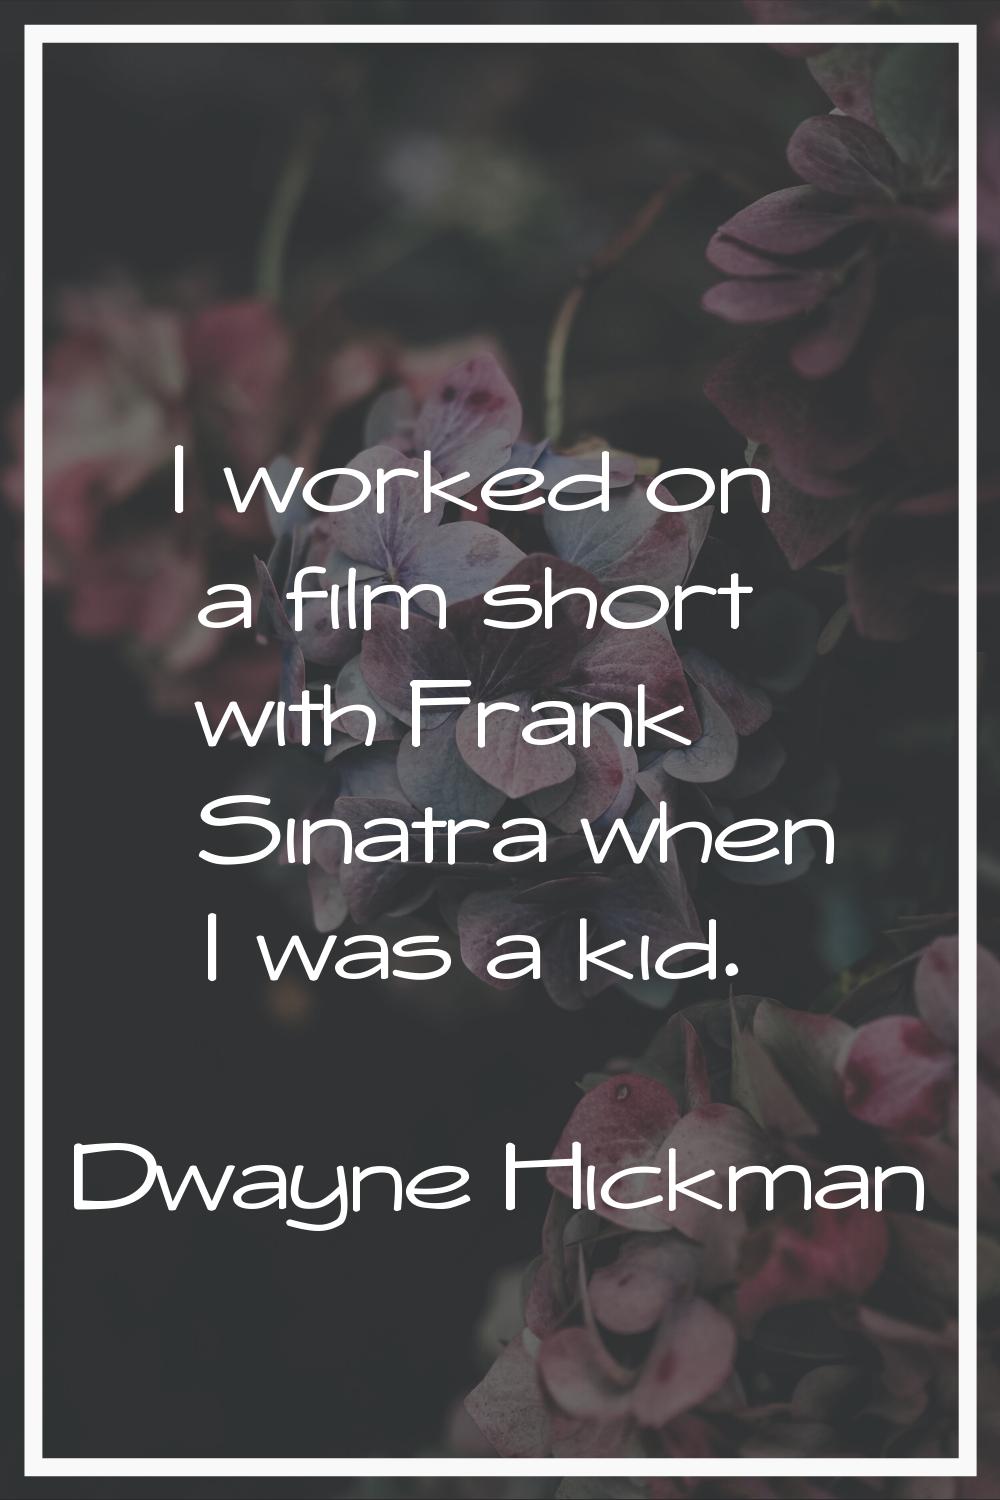 I worked on a film short with Frank Sinatra when I was a kid.